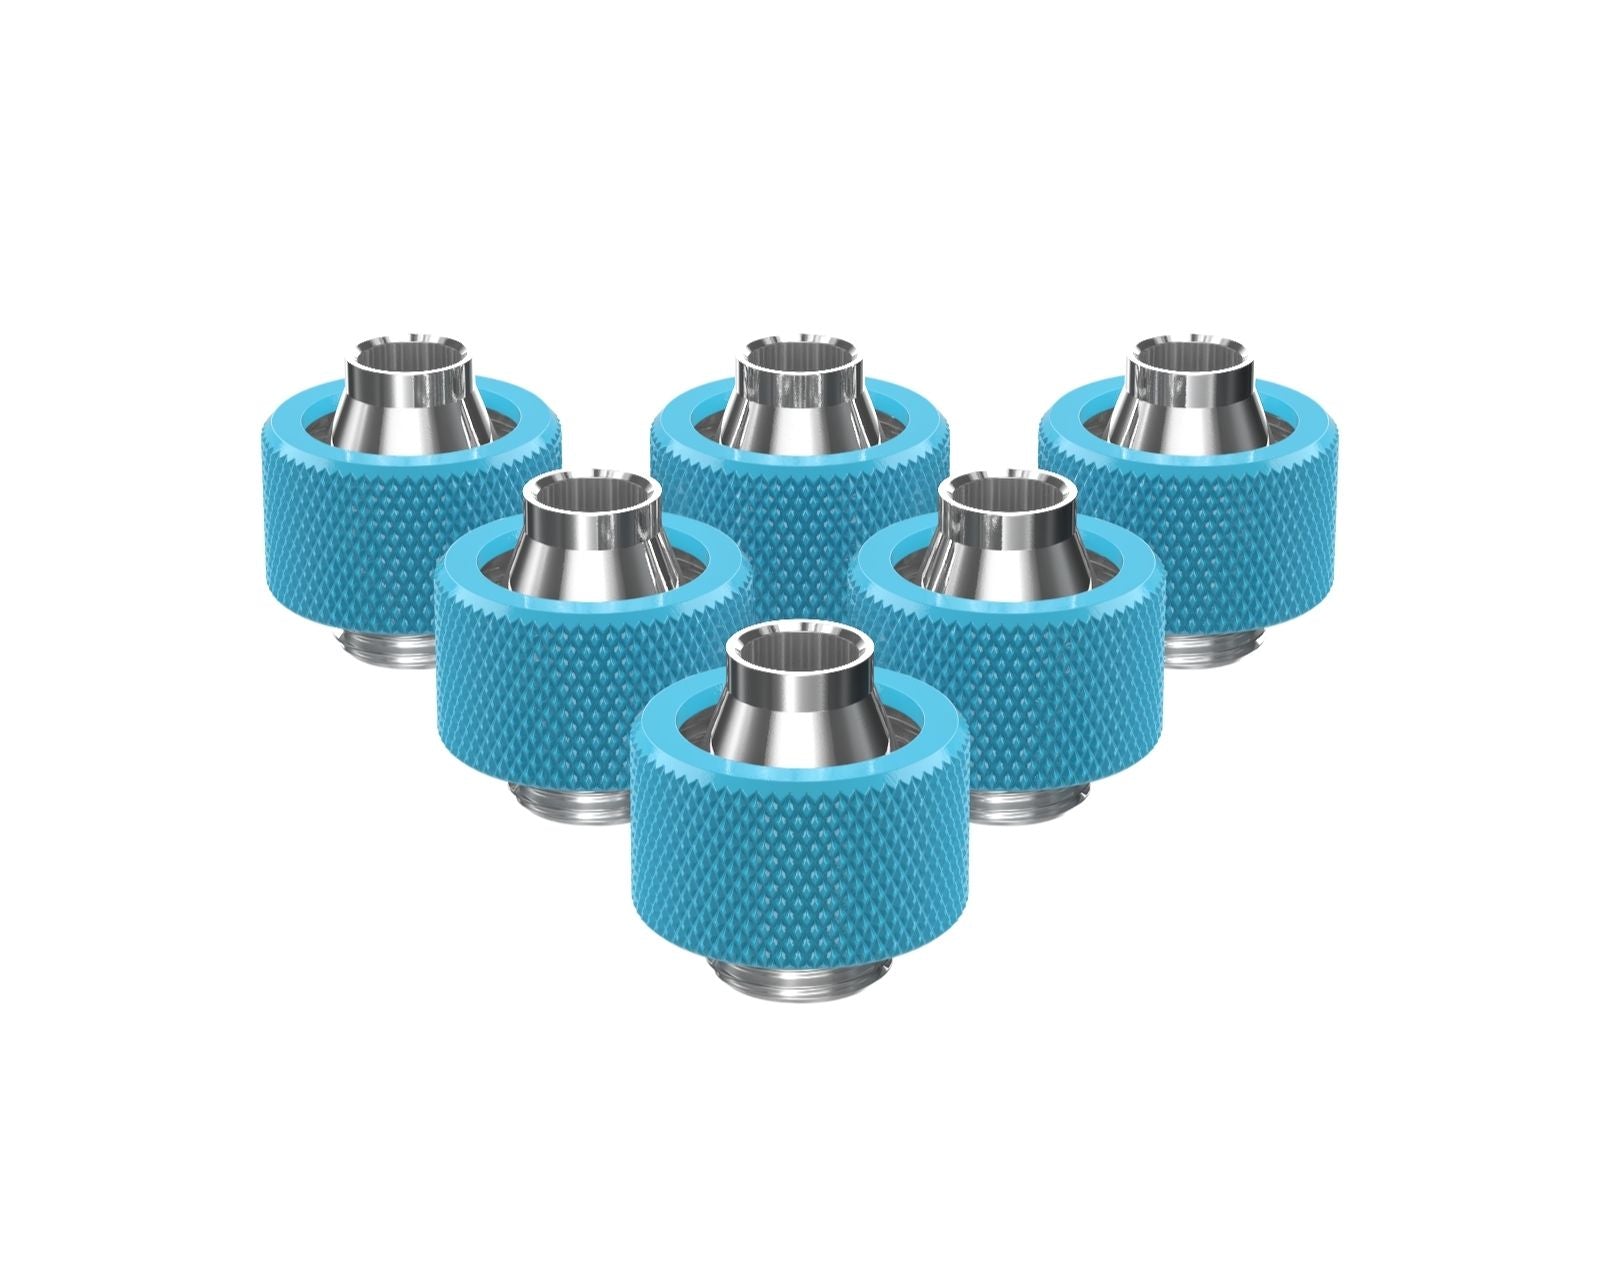 PrimoChill SecureFit SX - Premium Compression Fitting For 7/16in ID x 5/8in OD Flexible Tubing 6 Pack (F-SFSX758-6) - Available in 20+ Colors, Custom Watercooling Loop Ready - Sky Blue